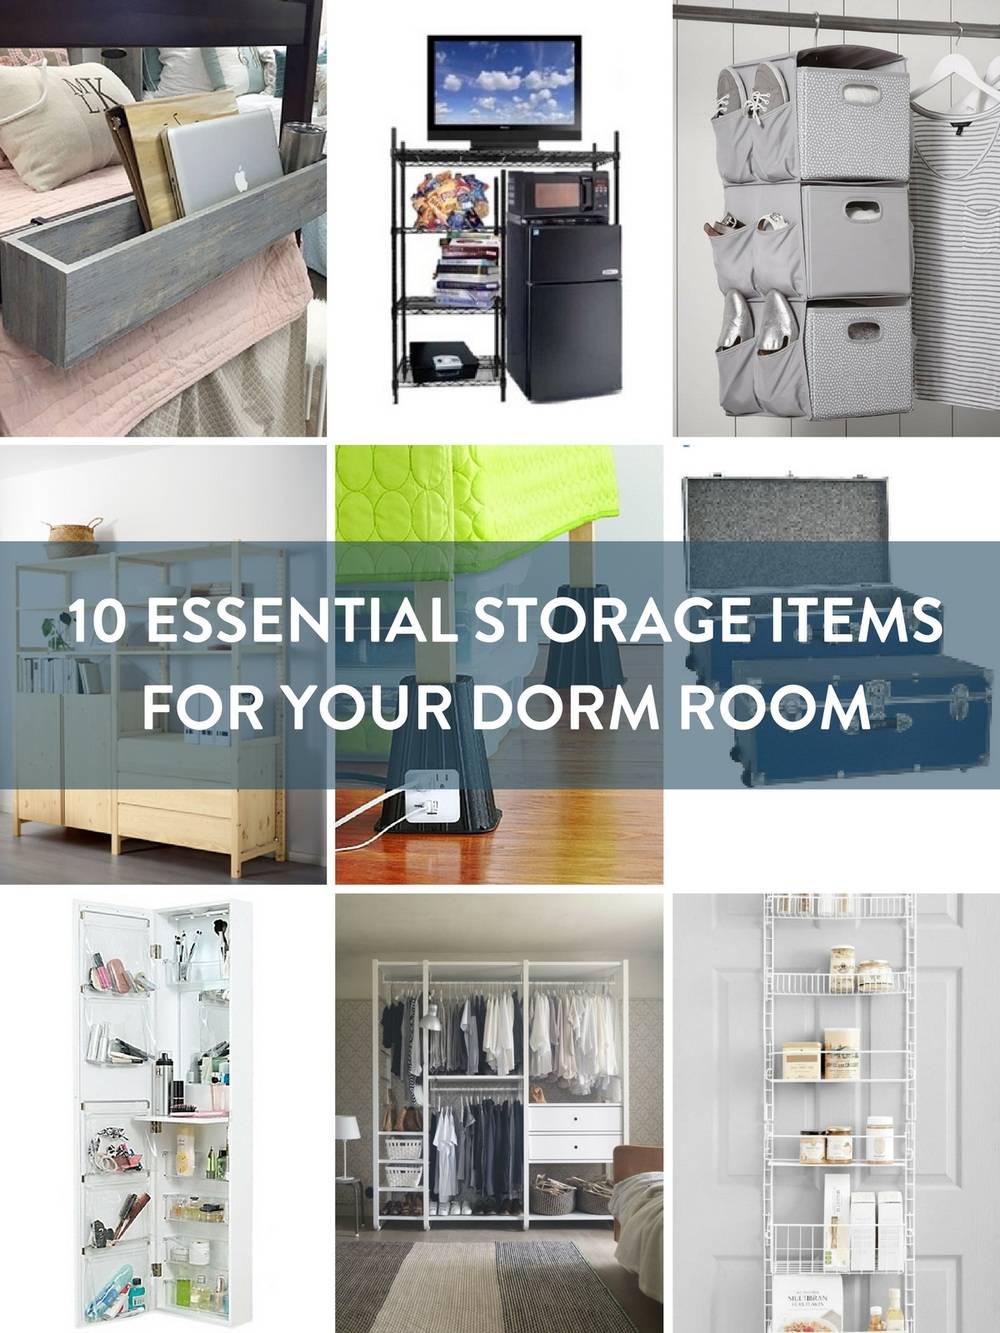 Nine pictures of different dorm storage solutions.